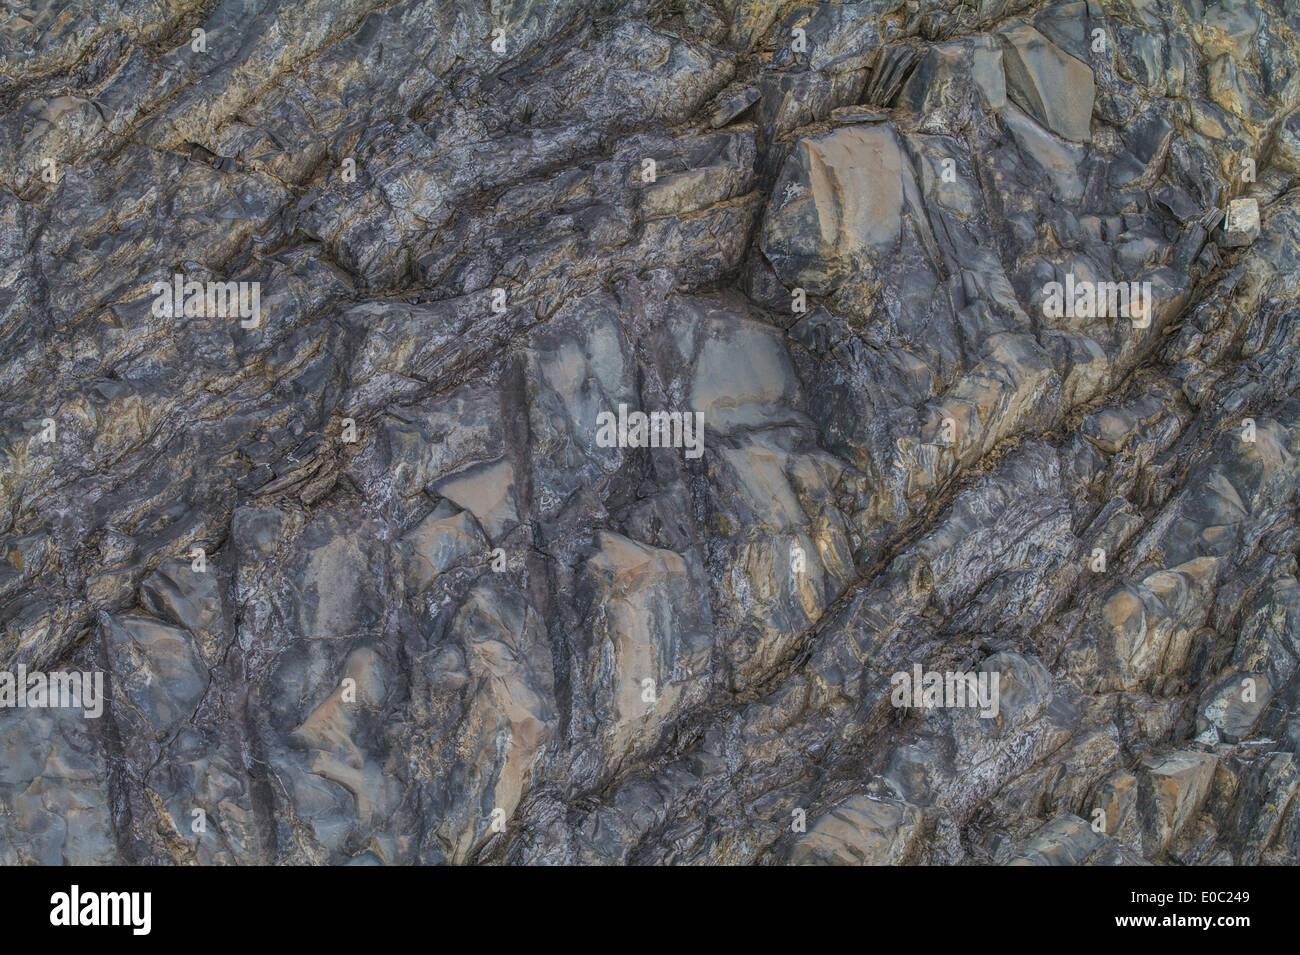 Rugged, textured, mountain rock face, full frame shot. Stock Photo